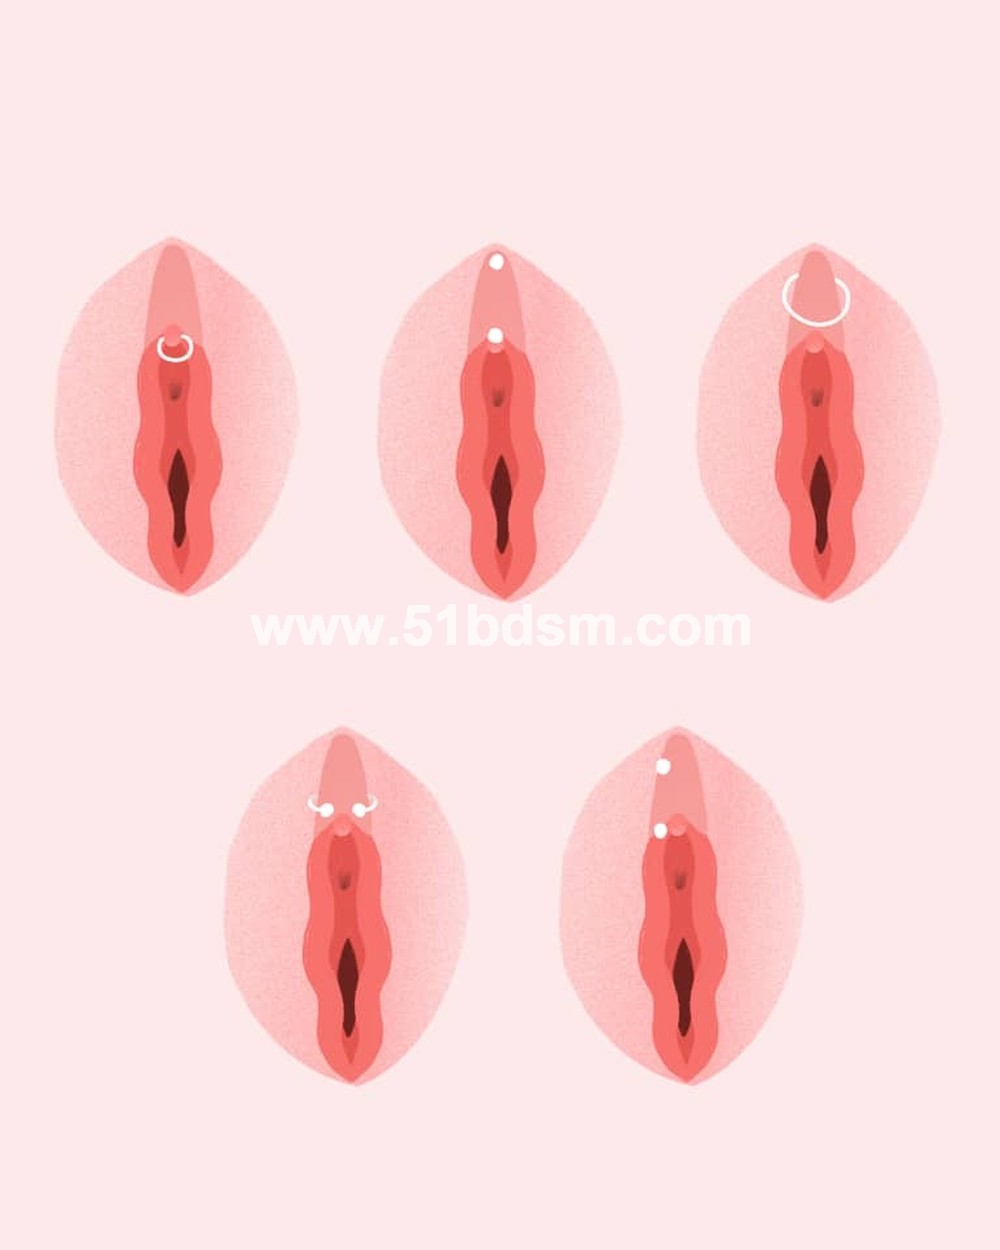 Image of different types of clit piercings.